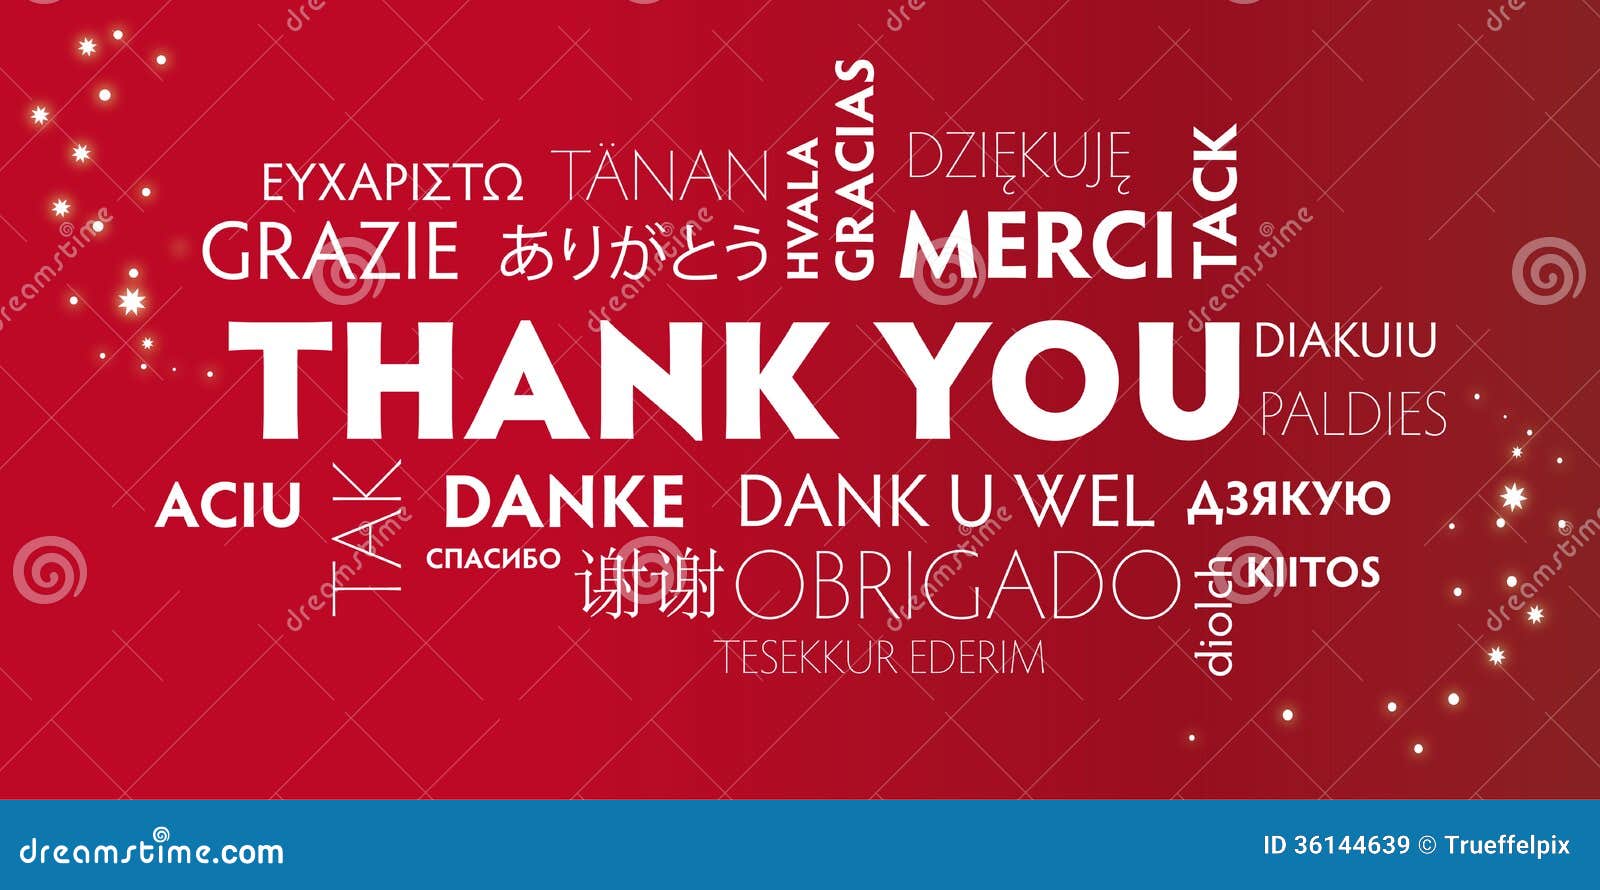 thank you clipart in different languages - photo #19